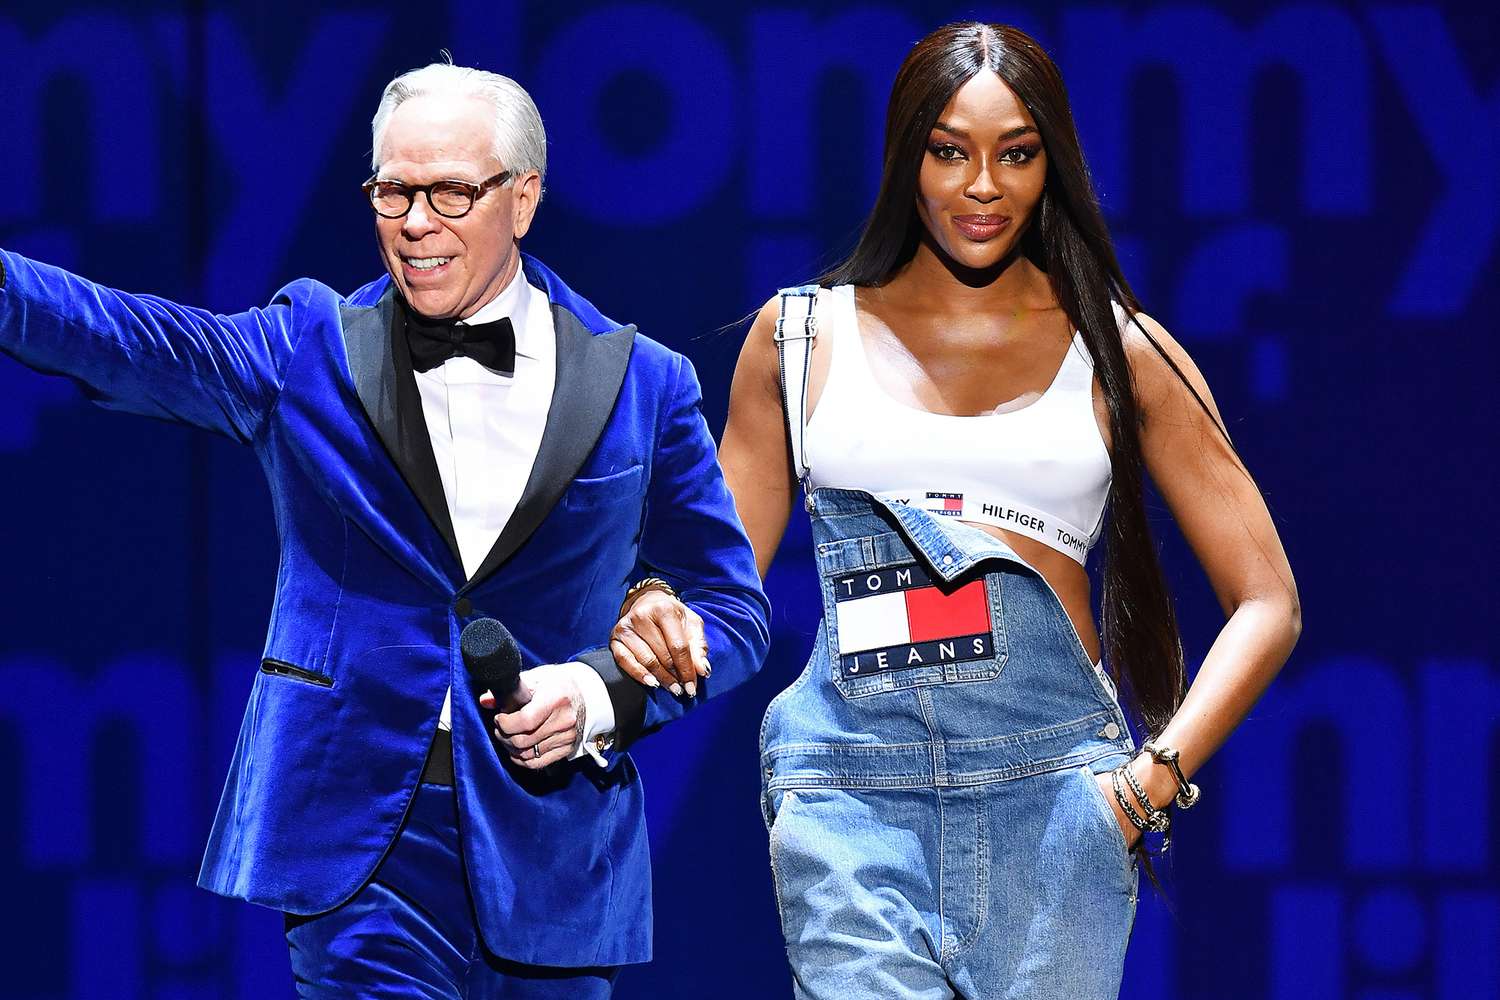 LONDON, ENGLAND - NOVEMBER 29: Tommy Hilfiger and Naomi Campbell on stage during The Fashion Awards 2021 at the Royal Albert Hall on November 29, 2021 in London, England. (Photo by Jeff Spicer/BFC/Getty Images for BFC)